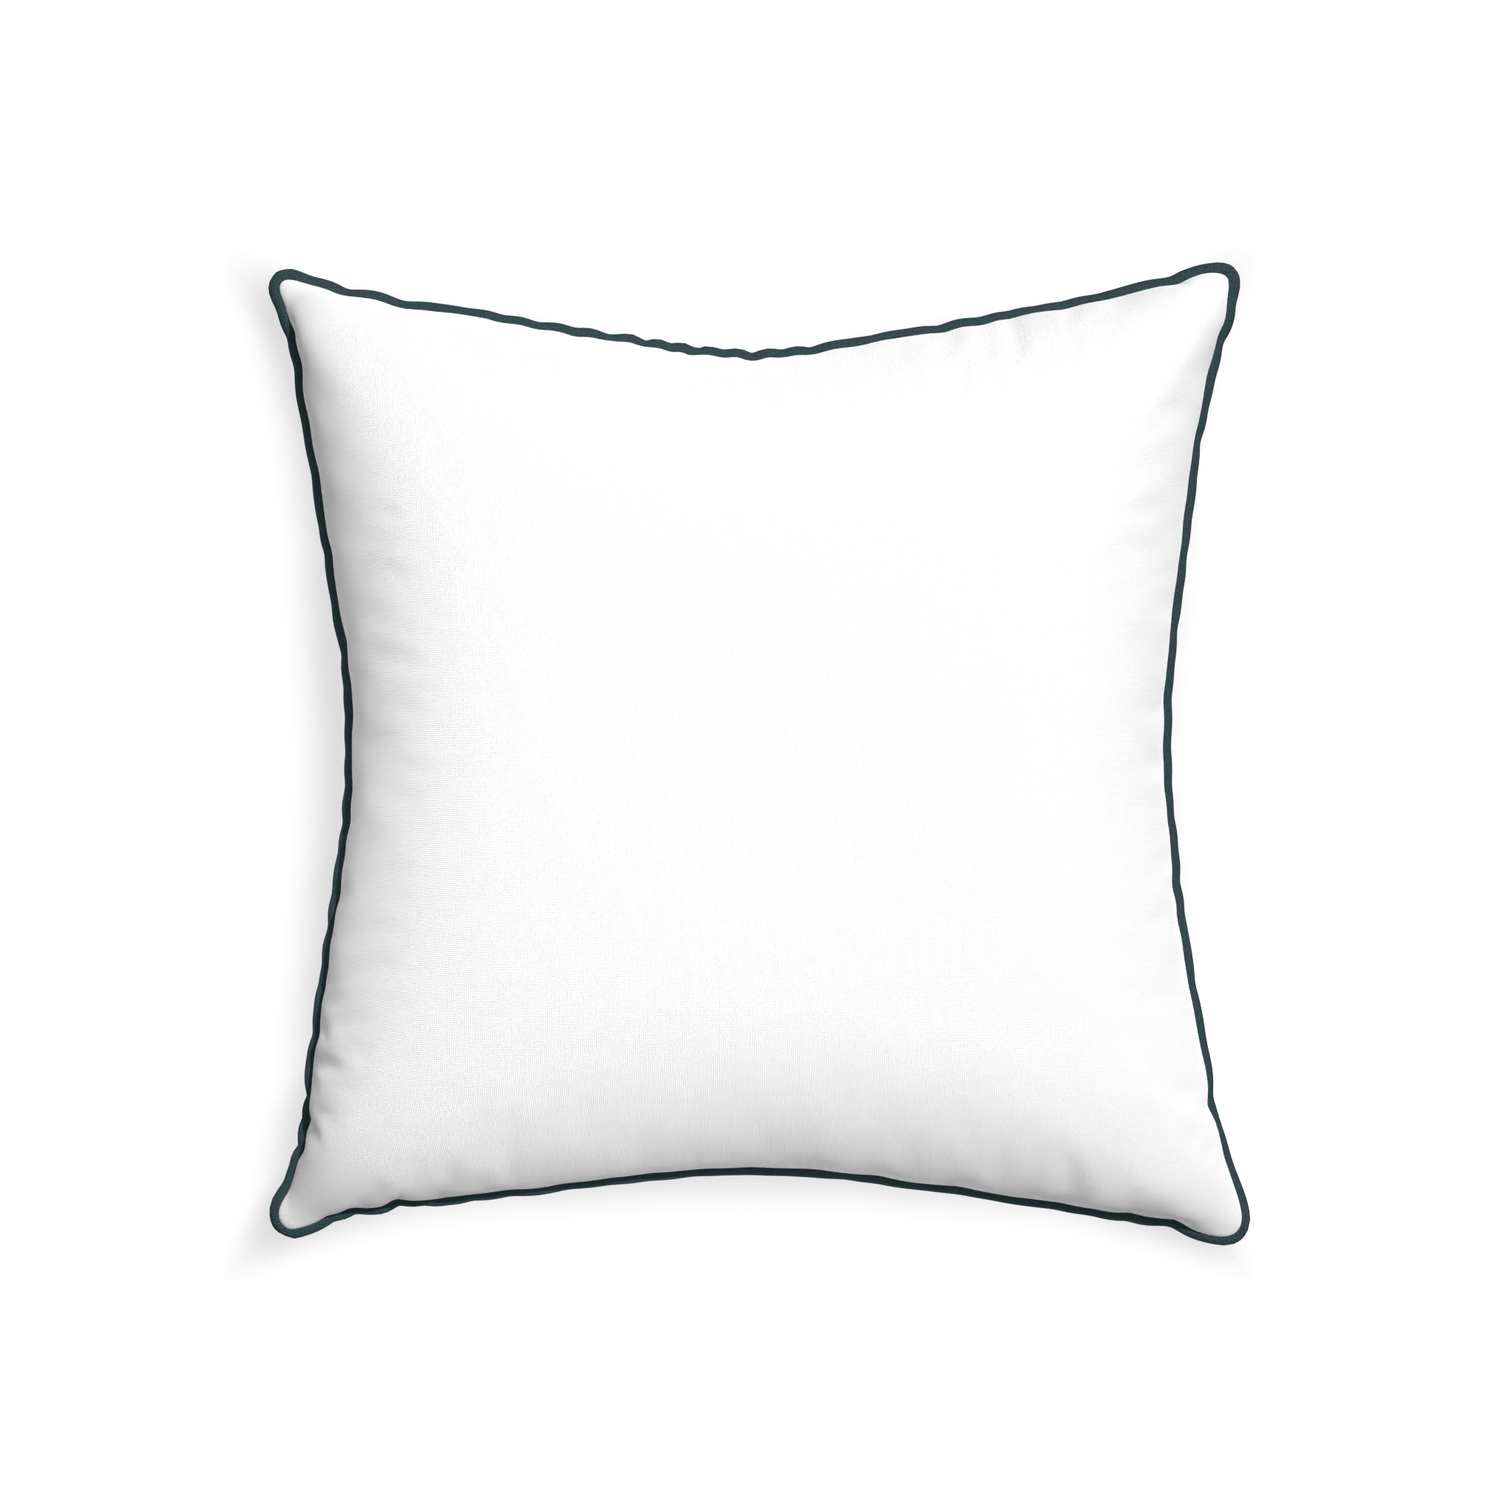 22-square snow custom white cottonpillow with p piping on white background